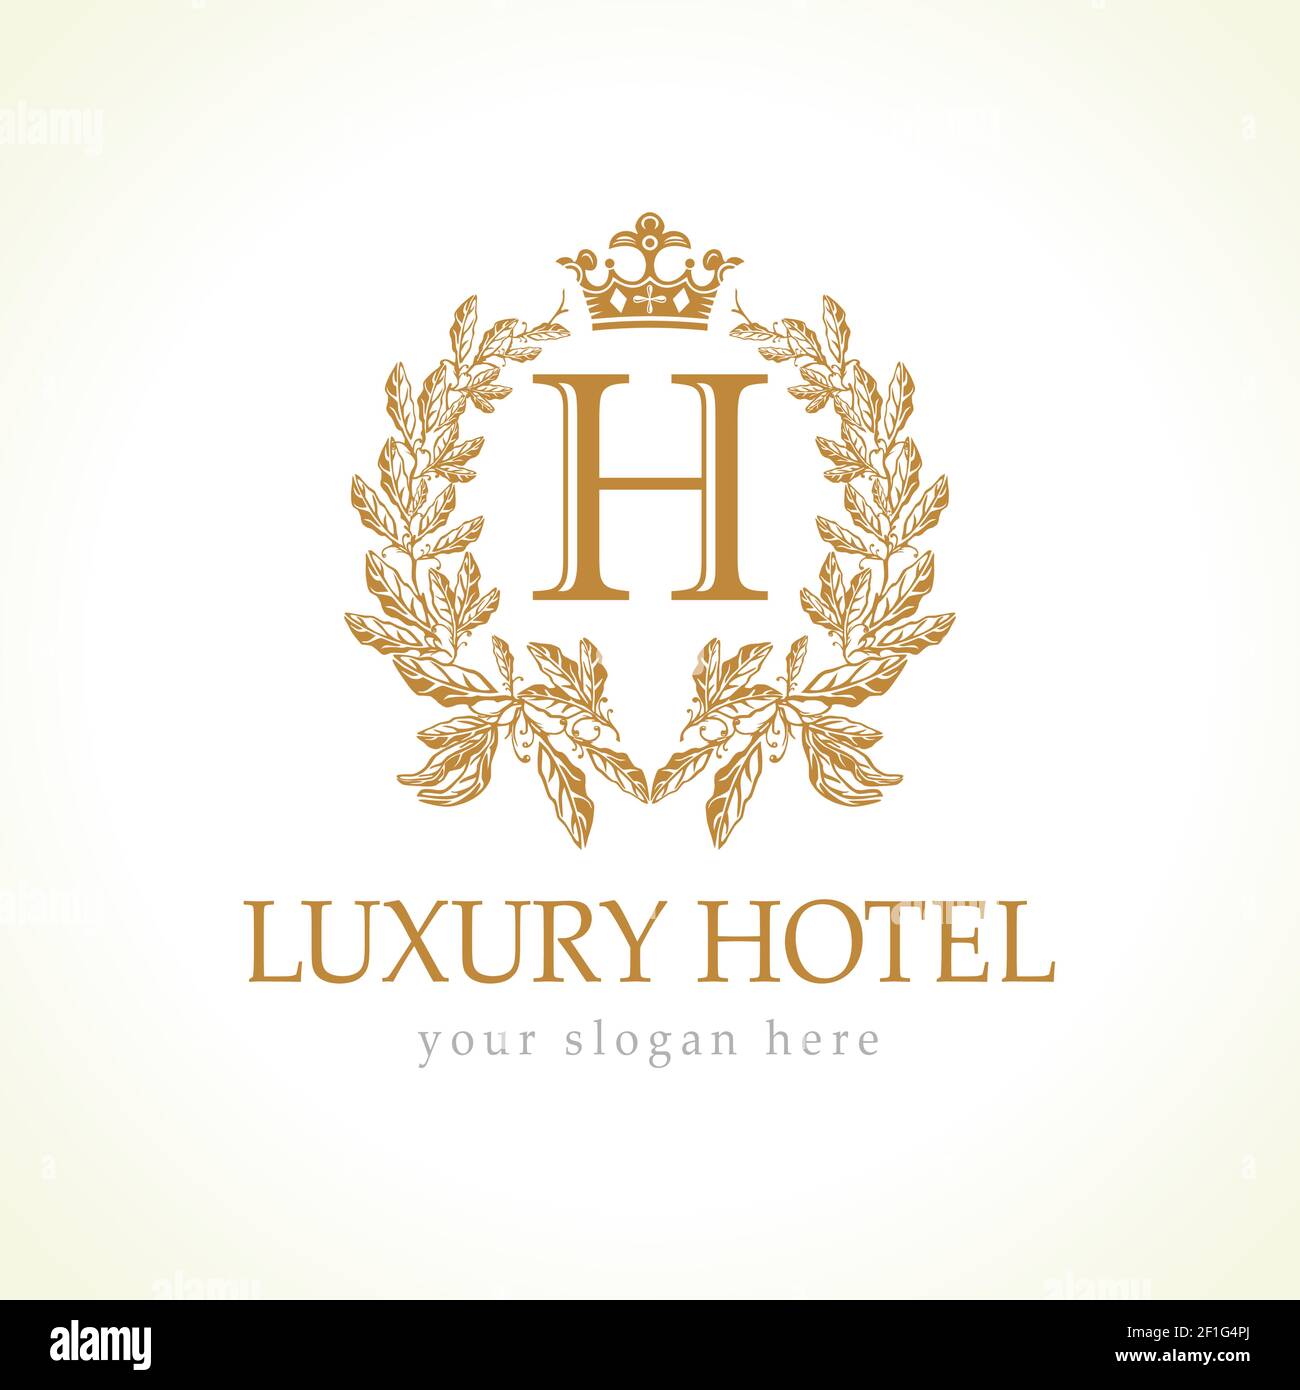 H company logotype. Luxurious hotel. Coat of arms, gold colored royalty heraldry. Decorative creative sign, branch of grapes and crown. Isolated abstr Stock Vector